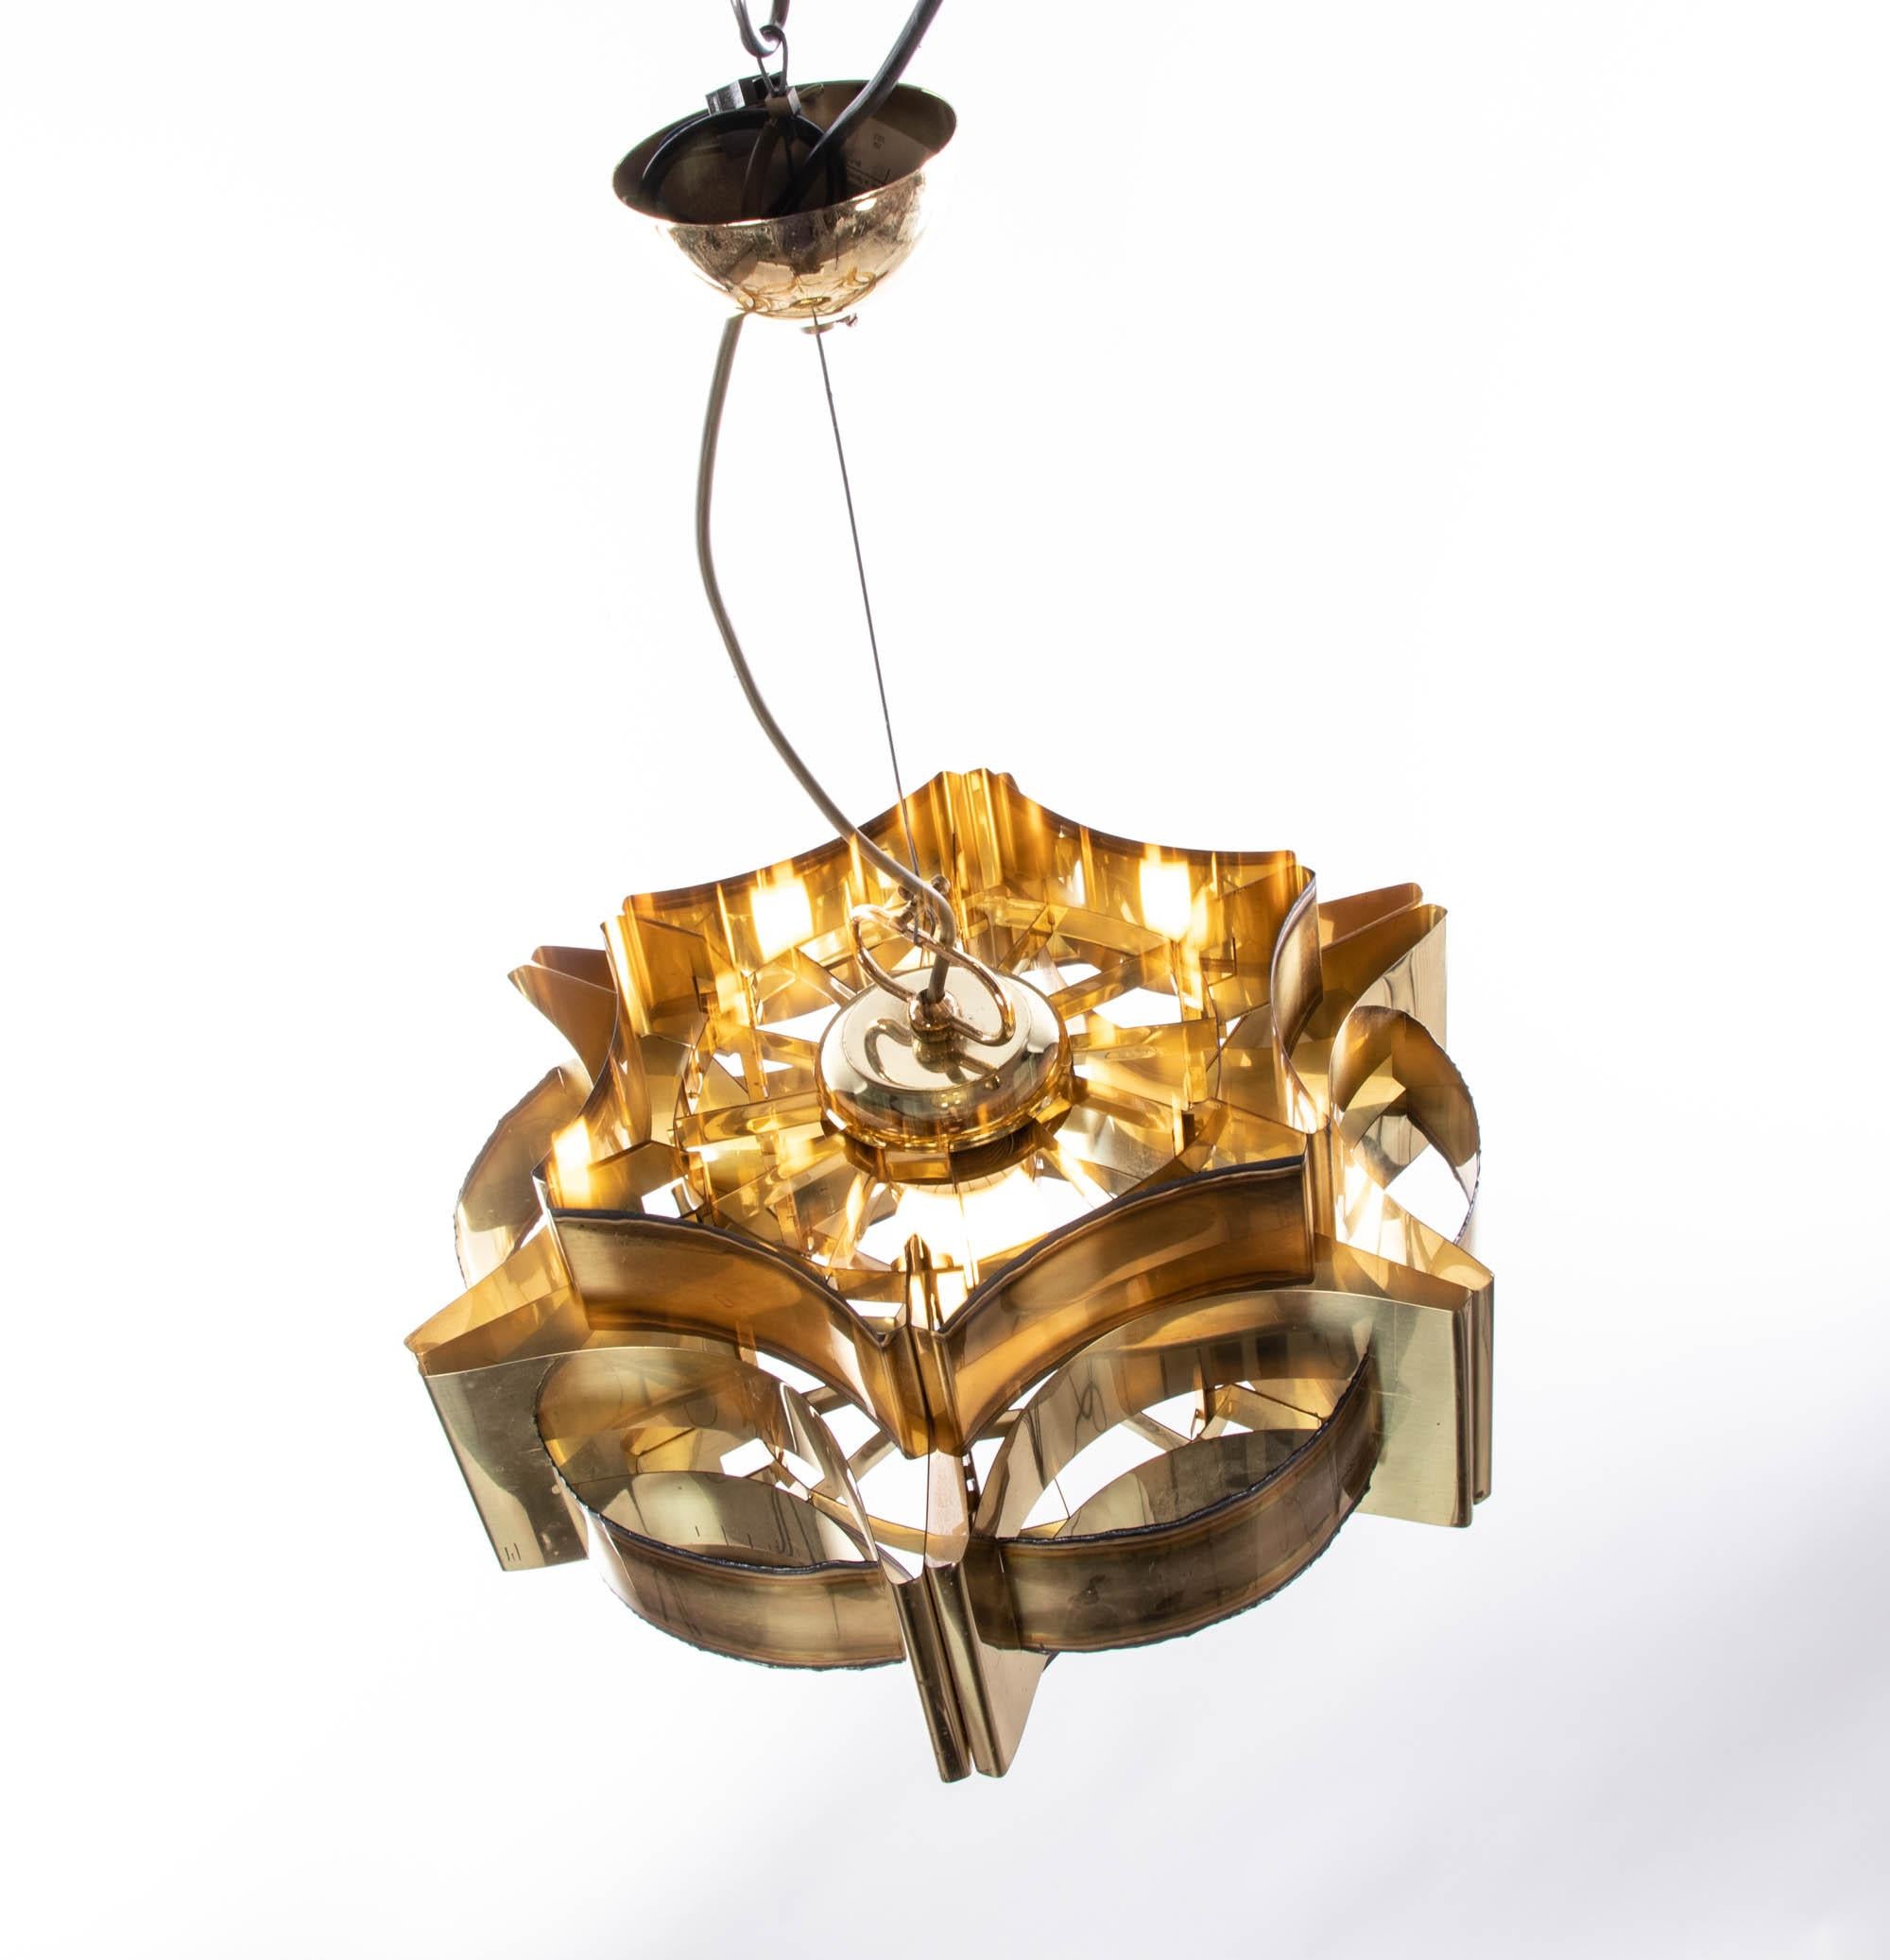 Elegant brutalist brass pendant lamp designed by Svend Aage. Chandelier illuminates beautifully and offers a lot of light. Manufactured by Holm Soerensen, Denmark in the 1960s. 

Design: Svend Aage. 
Measures: body height 9.85